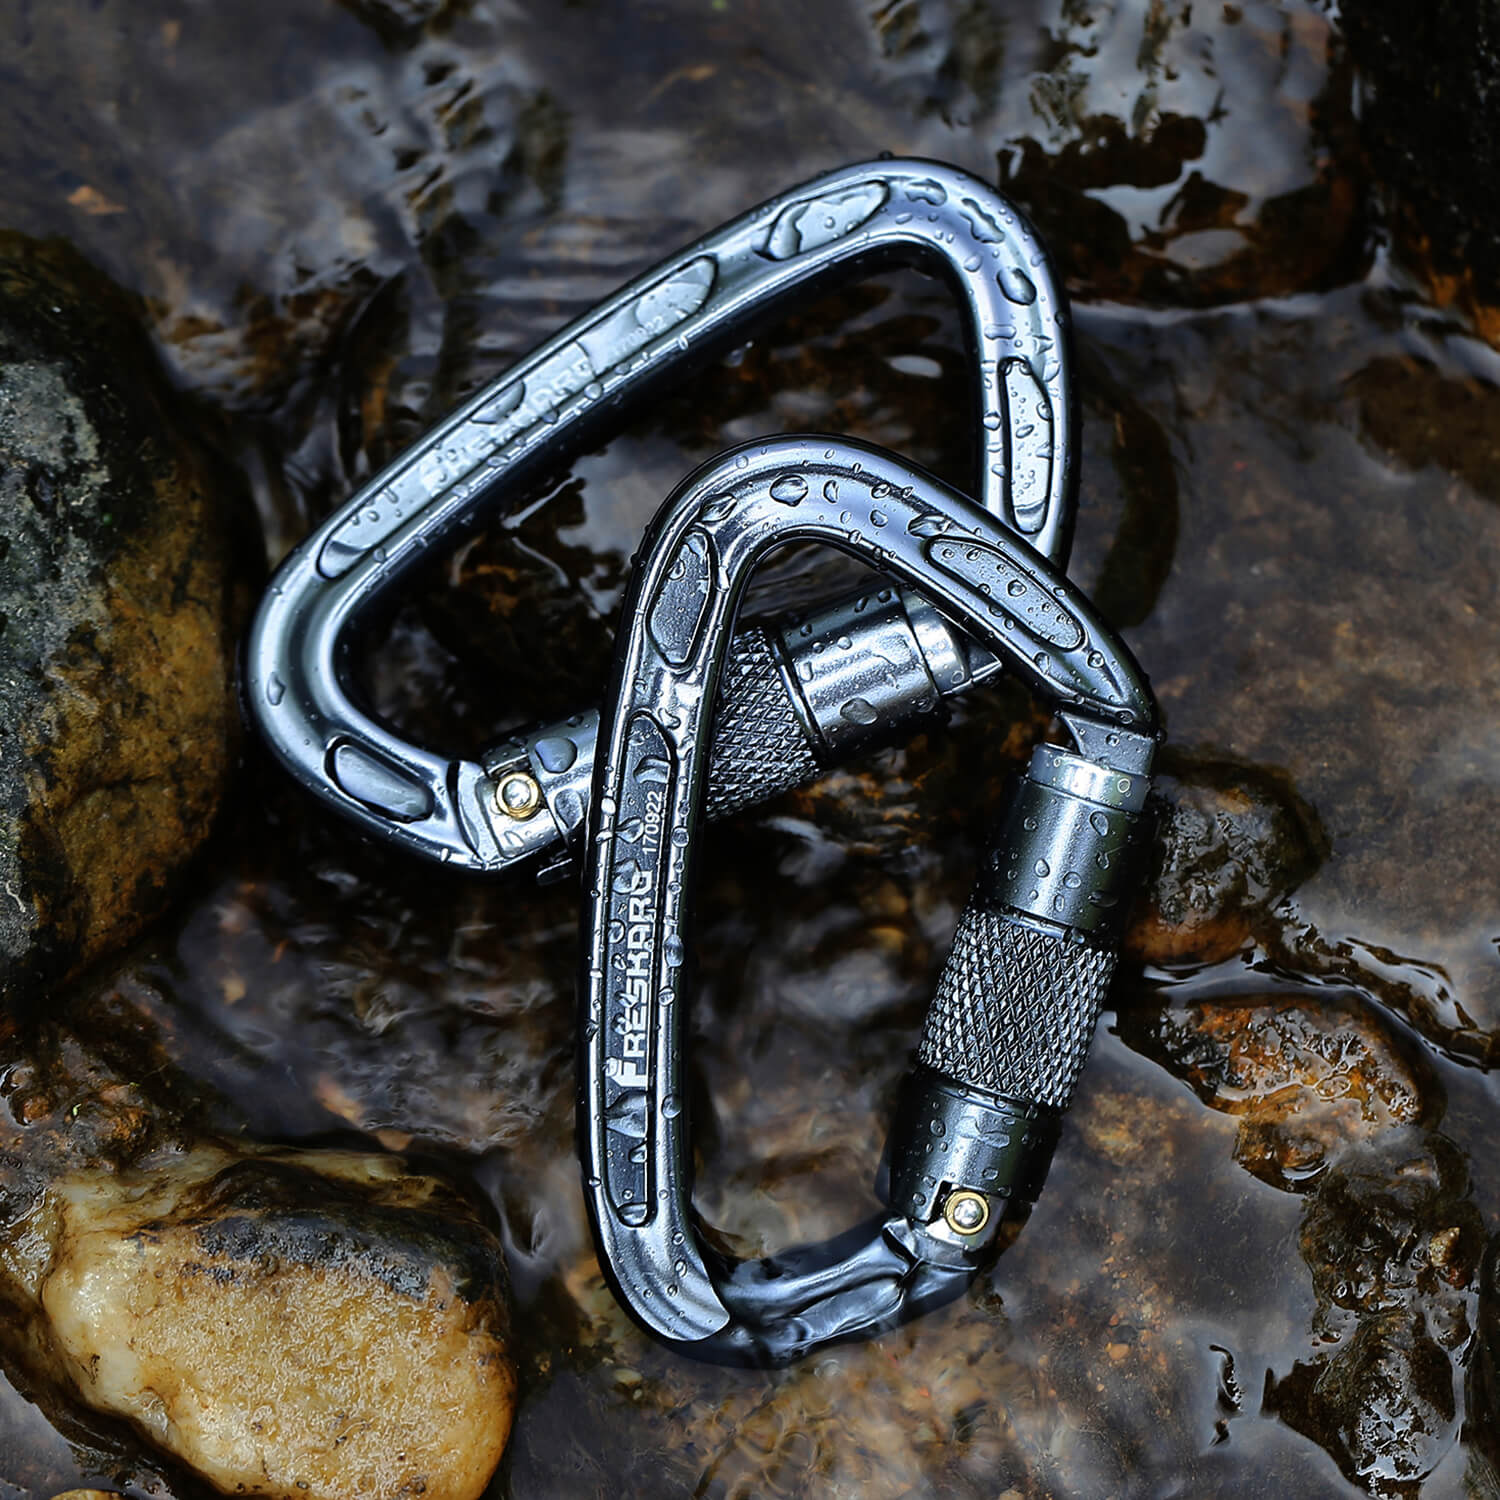 Dog Leash Climbing Traveling Camping Climbing Carabiners YAKAON 2pcs Aluminum Alloy Locking Carabiner Clips 25KN Heavy Duty D-Ring Carabiner Hook with Screwgate for Hammocks 